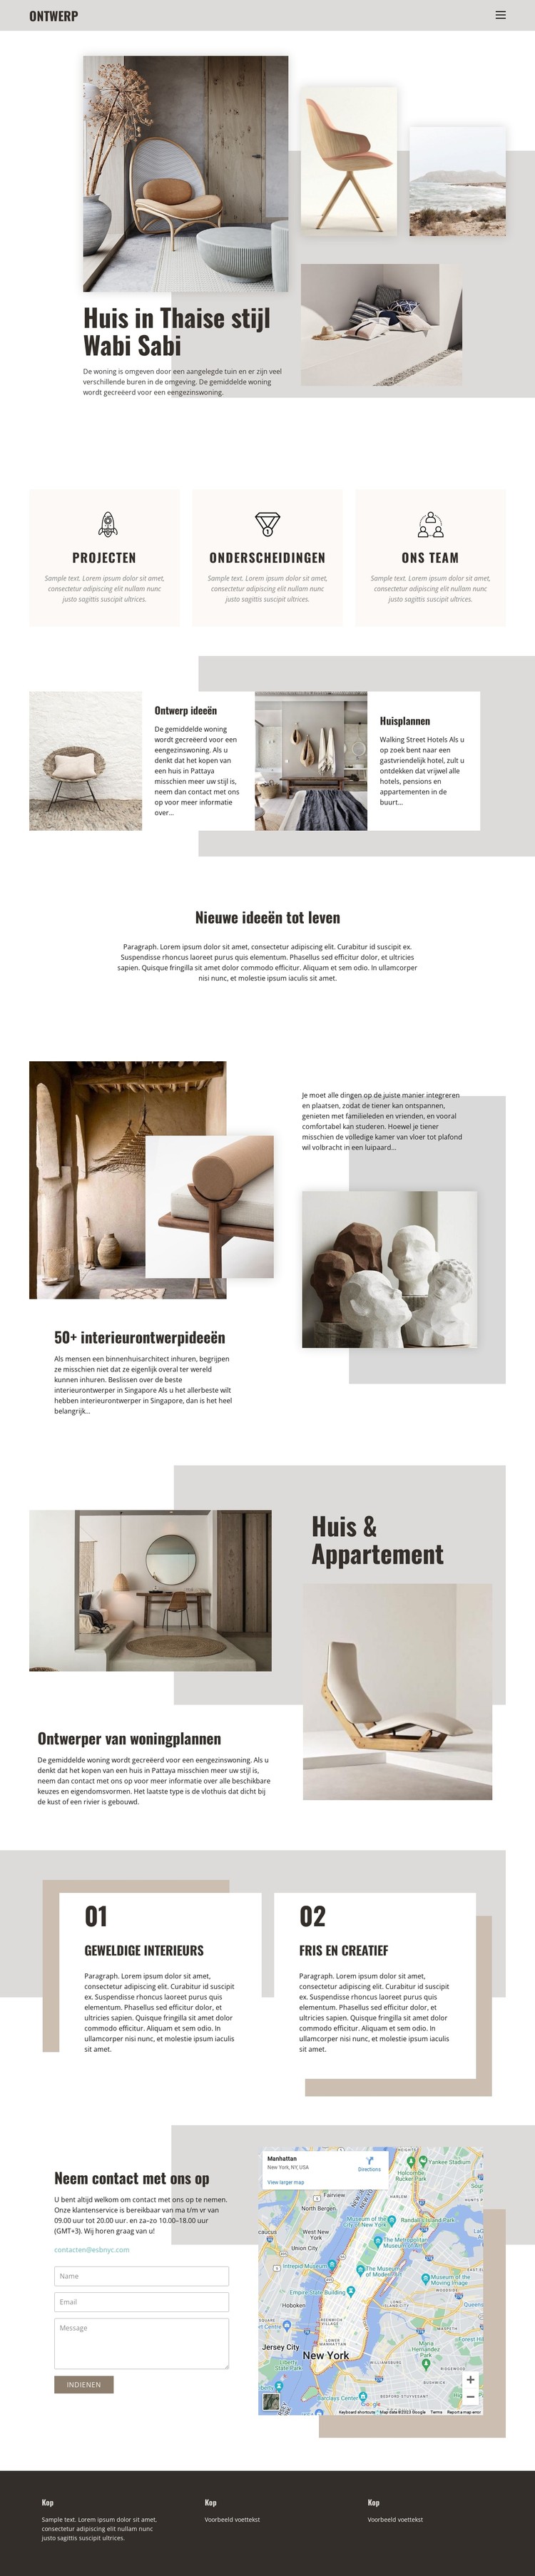 Thais huisstyling interieur CSS-sjabloon